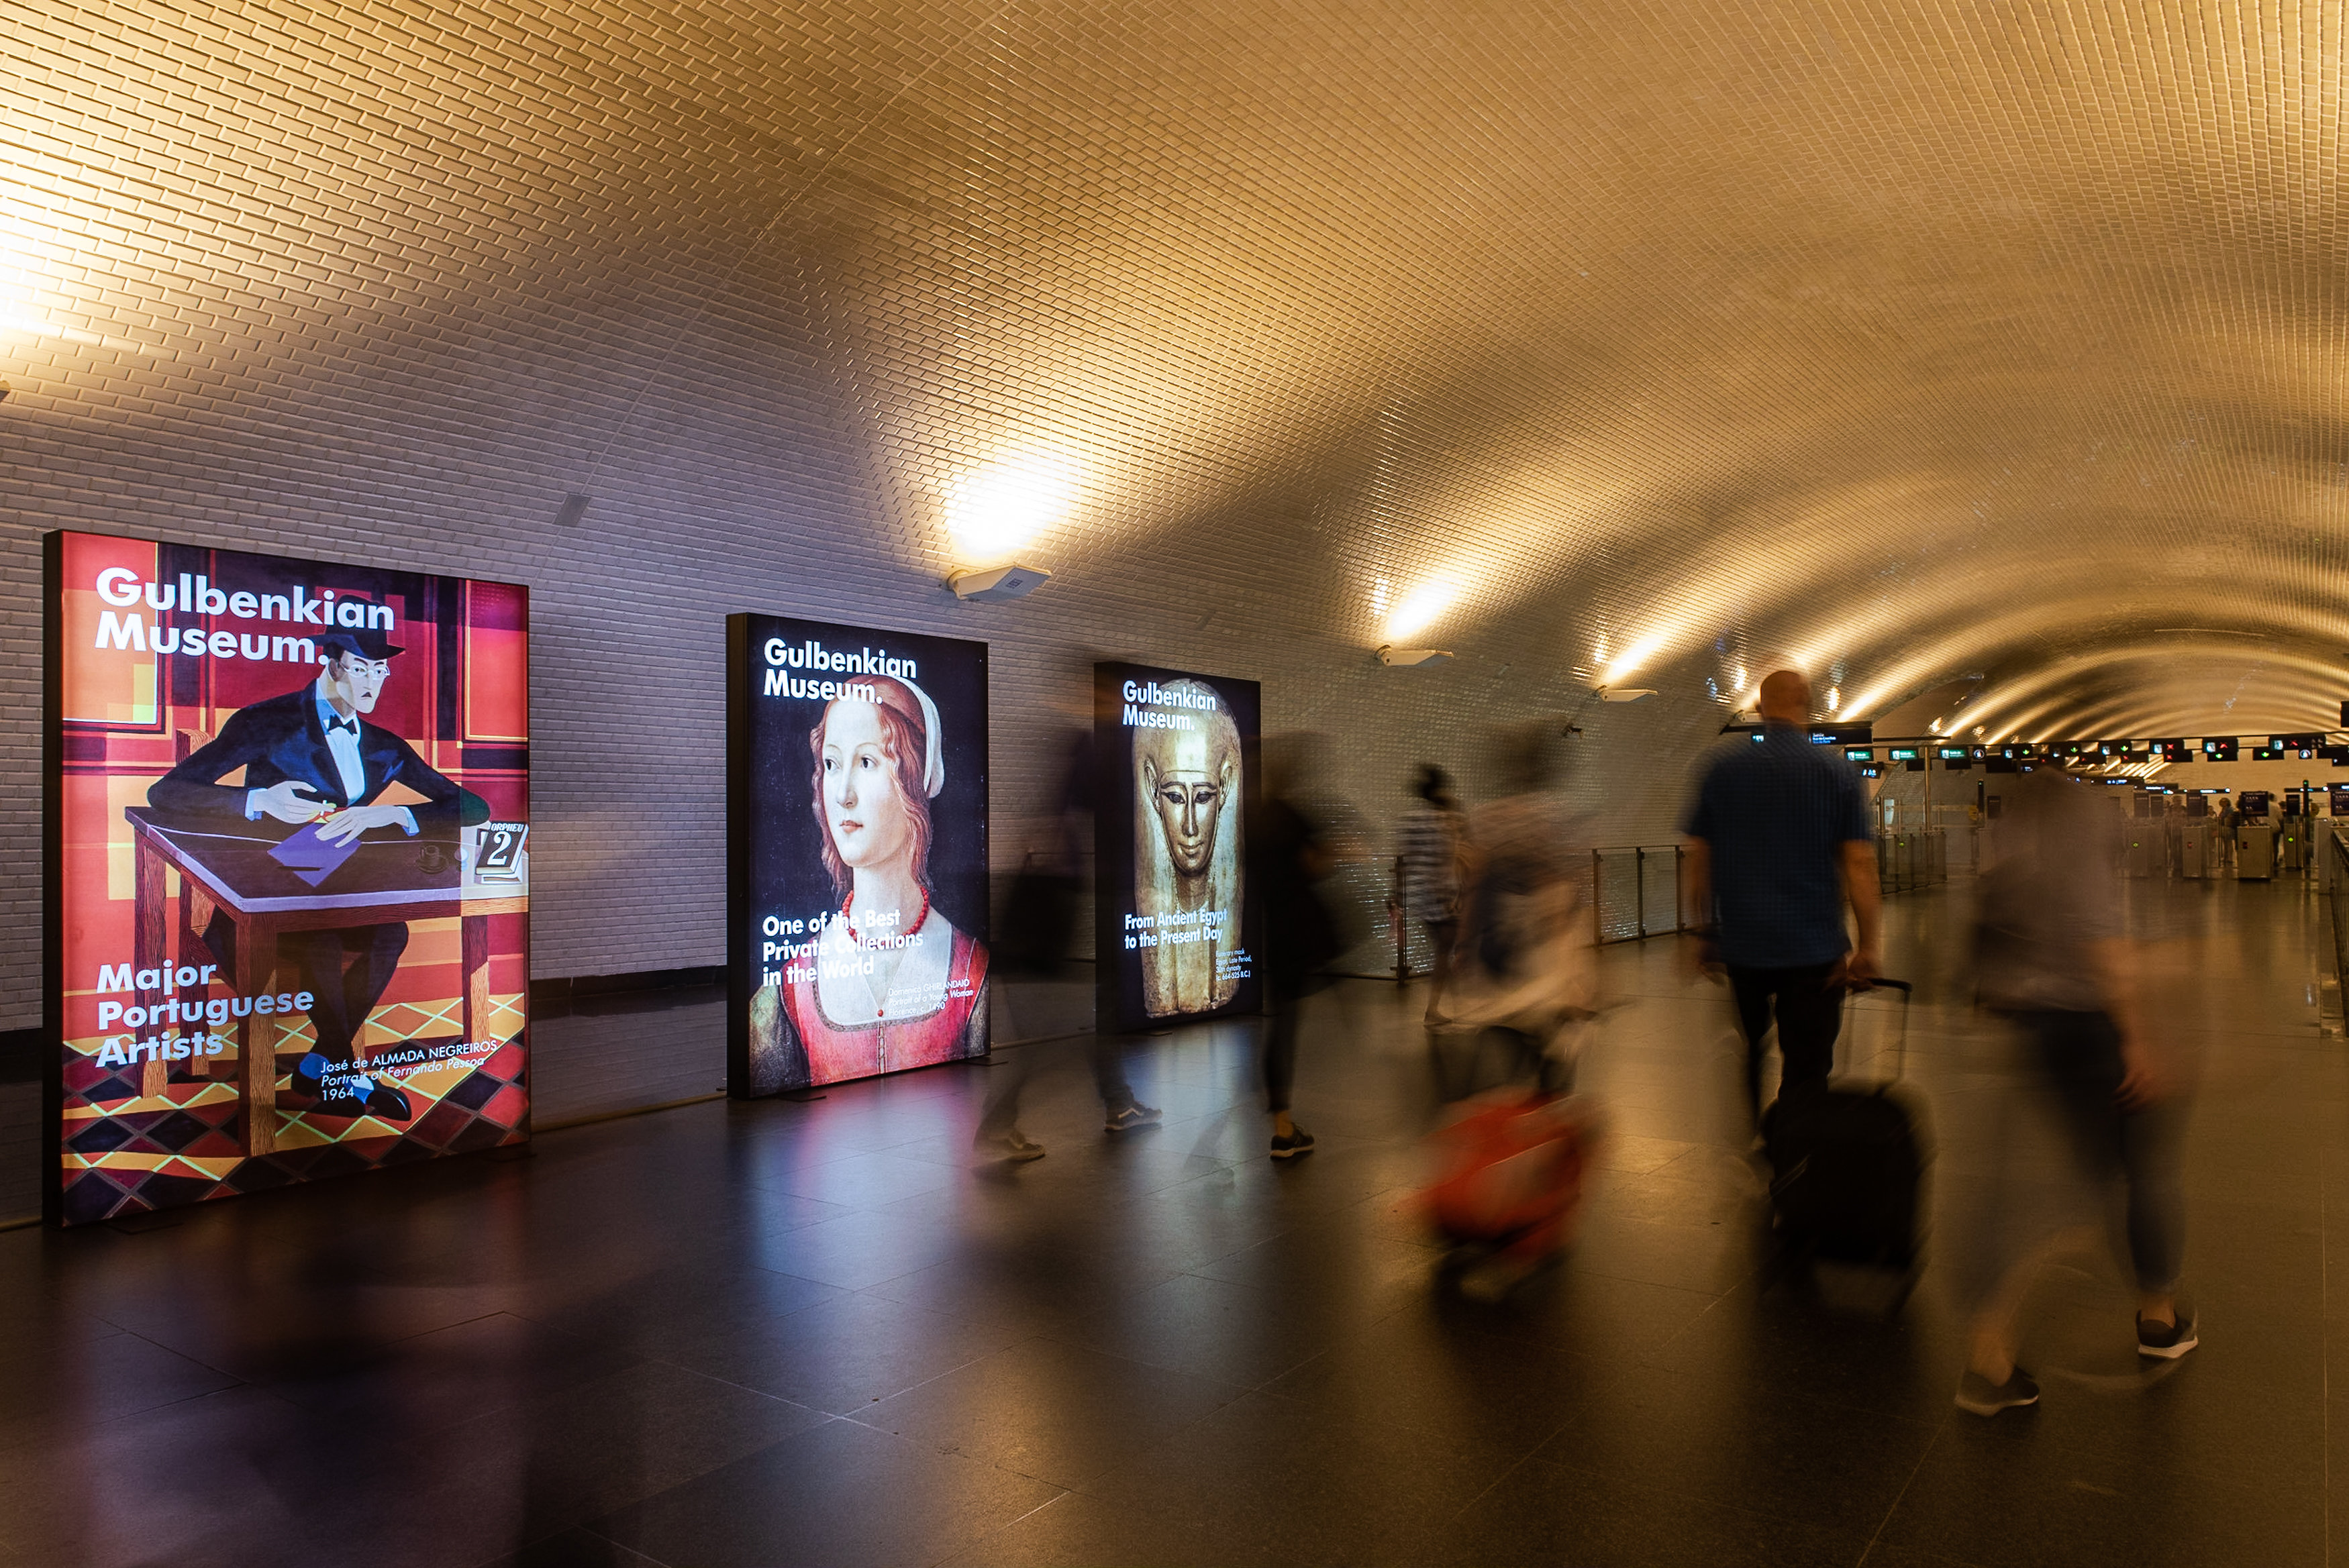 Paintings from the Gulbenkian Museum shown at the Baixa-Chiado subway station